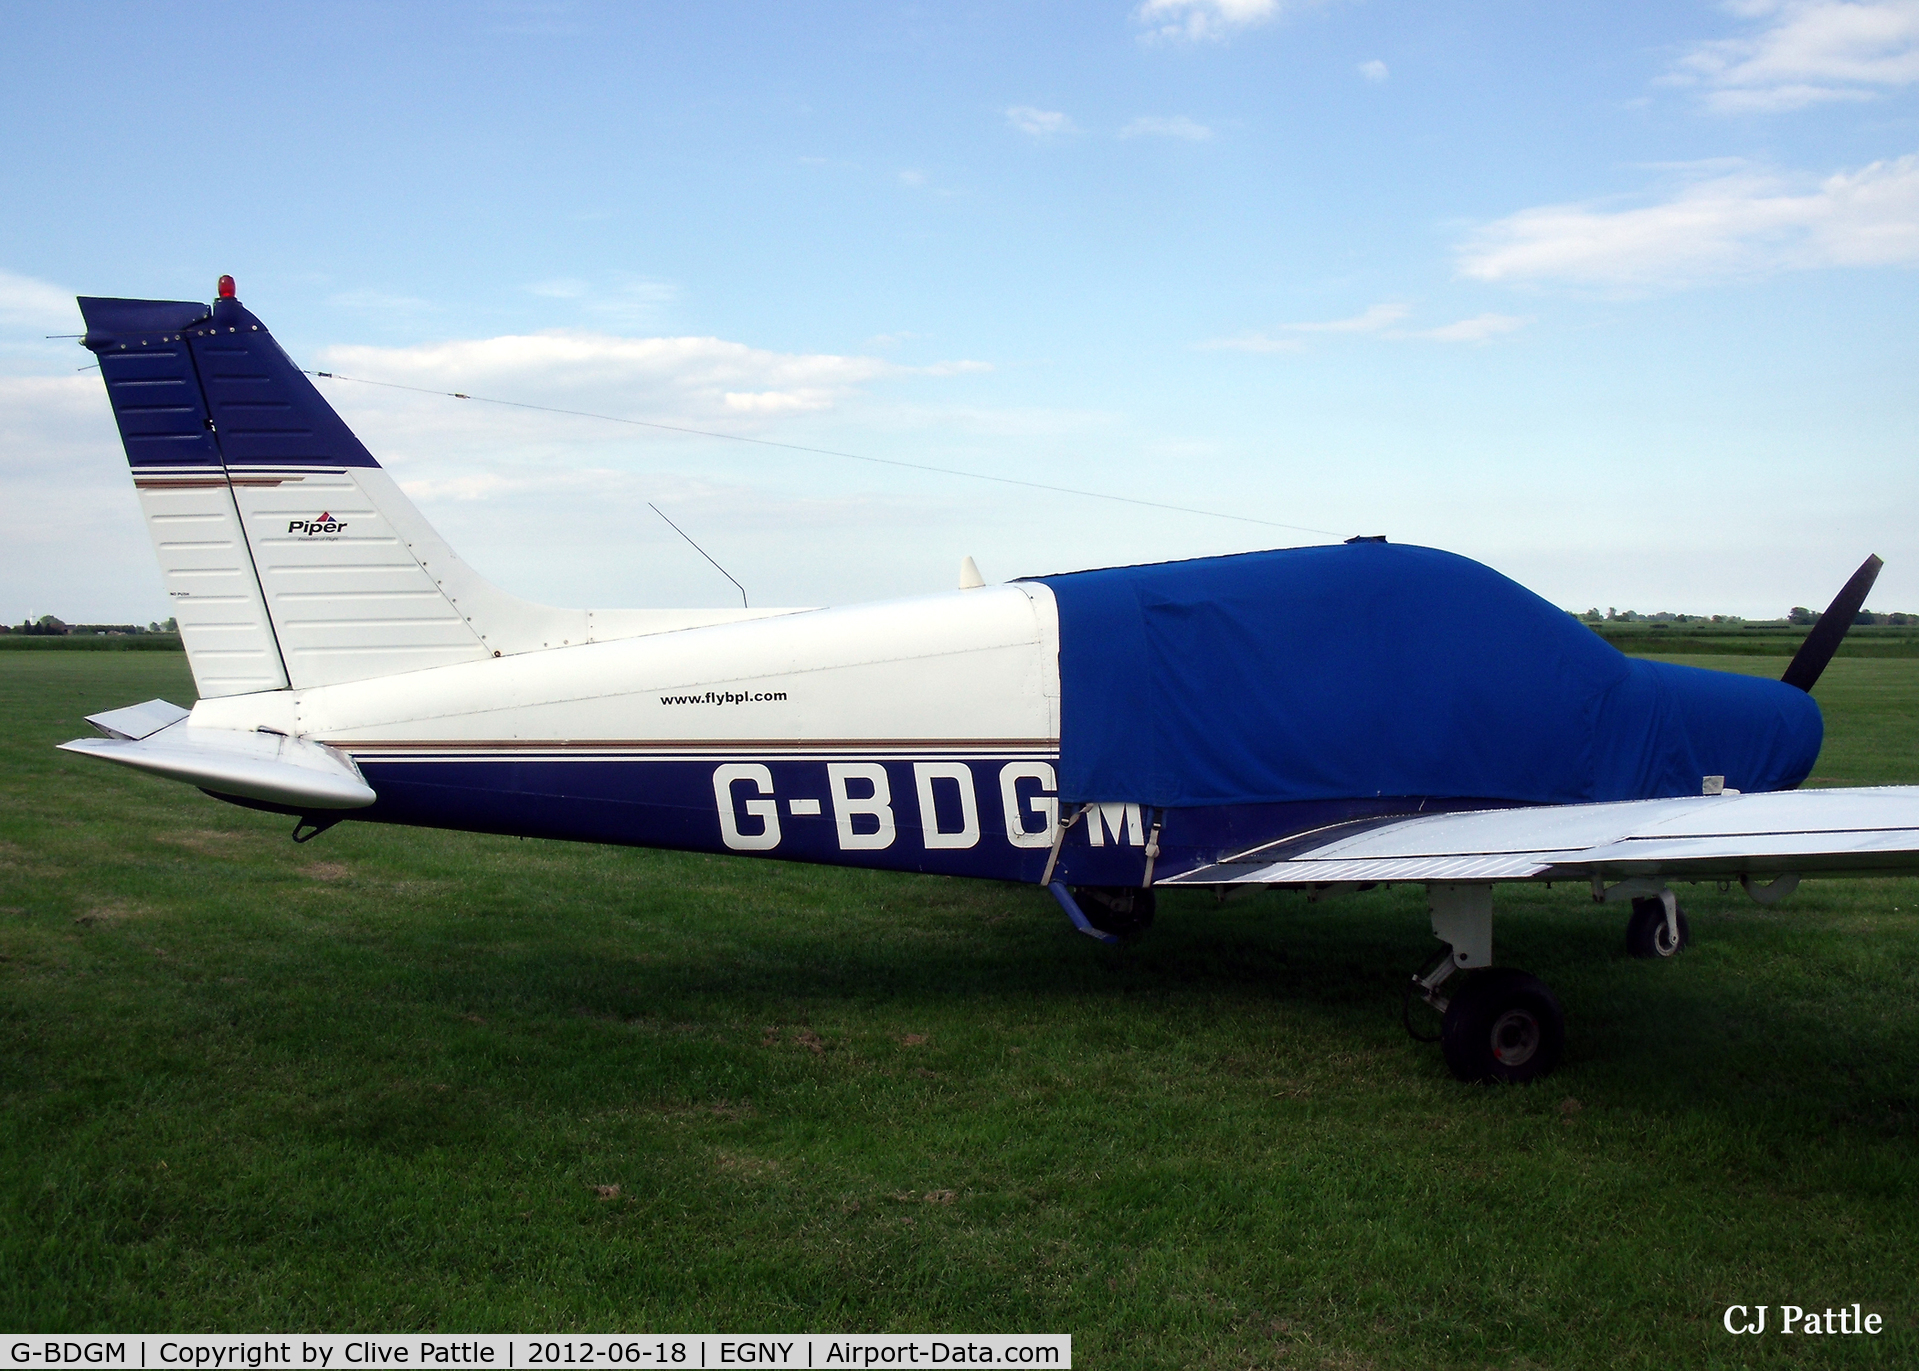 G-BDGM, 1974 Piper PA-28-151 Cherokee Warrior C/N 28-7415165, Resting at Linley Hill